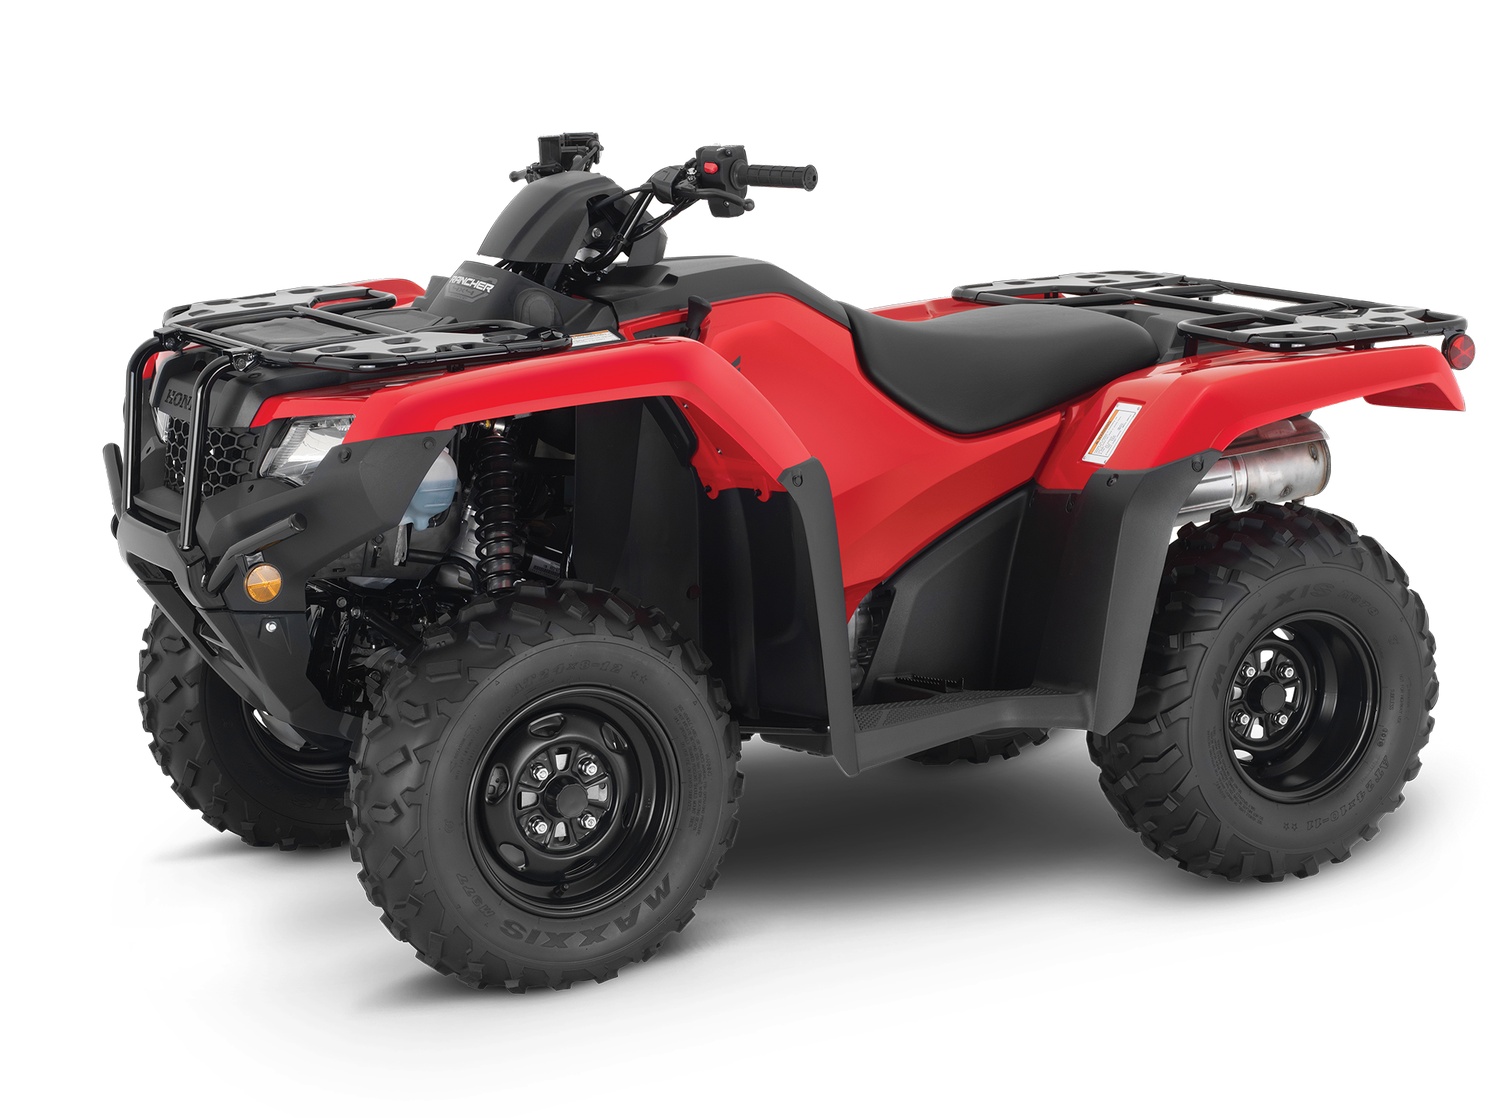 Honda TRX420 RANCHER 2023 - PRE-ORDER YOURS NOW